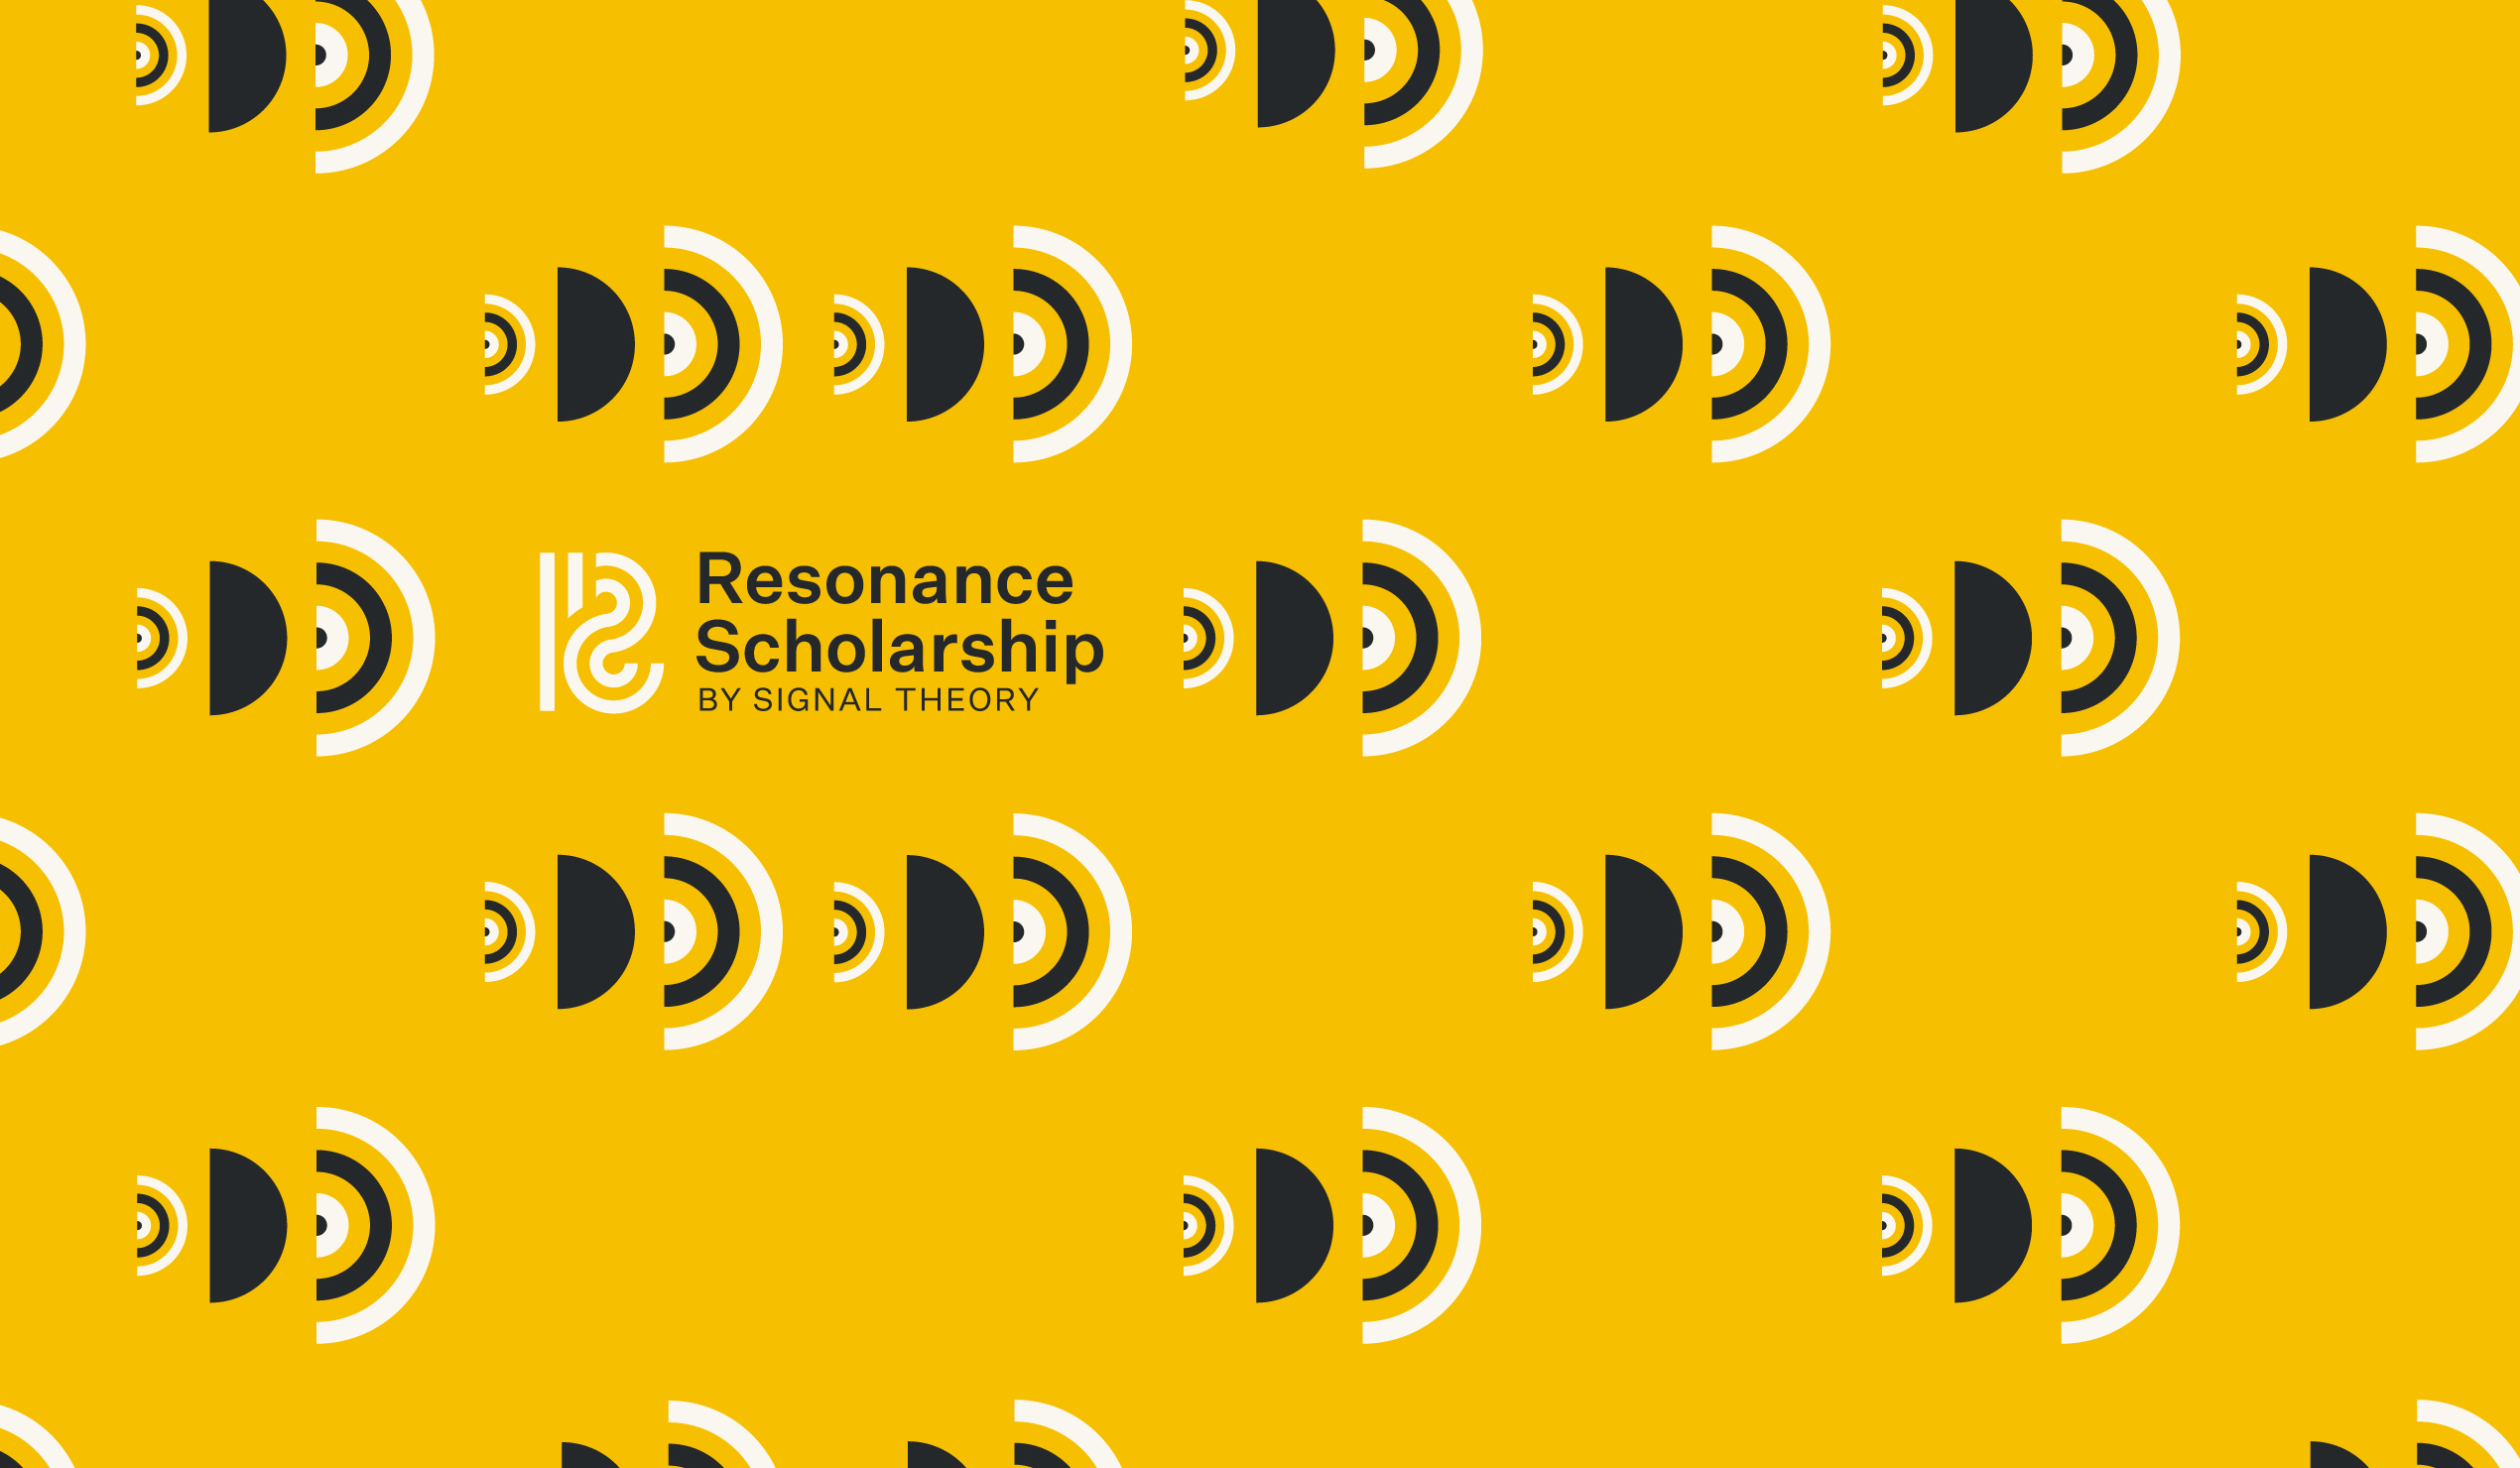 A graphic pattern with the Resonance Scholarship logo